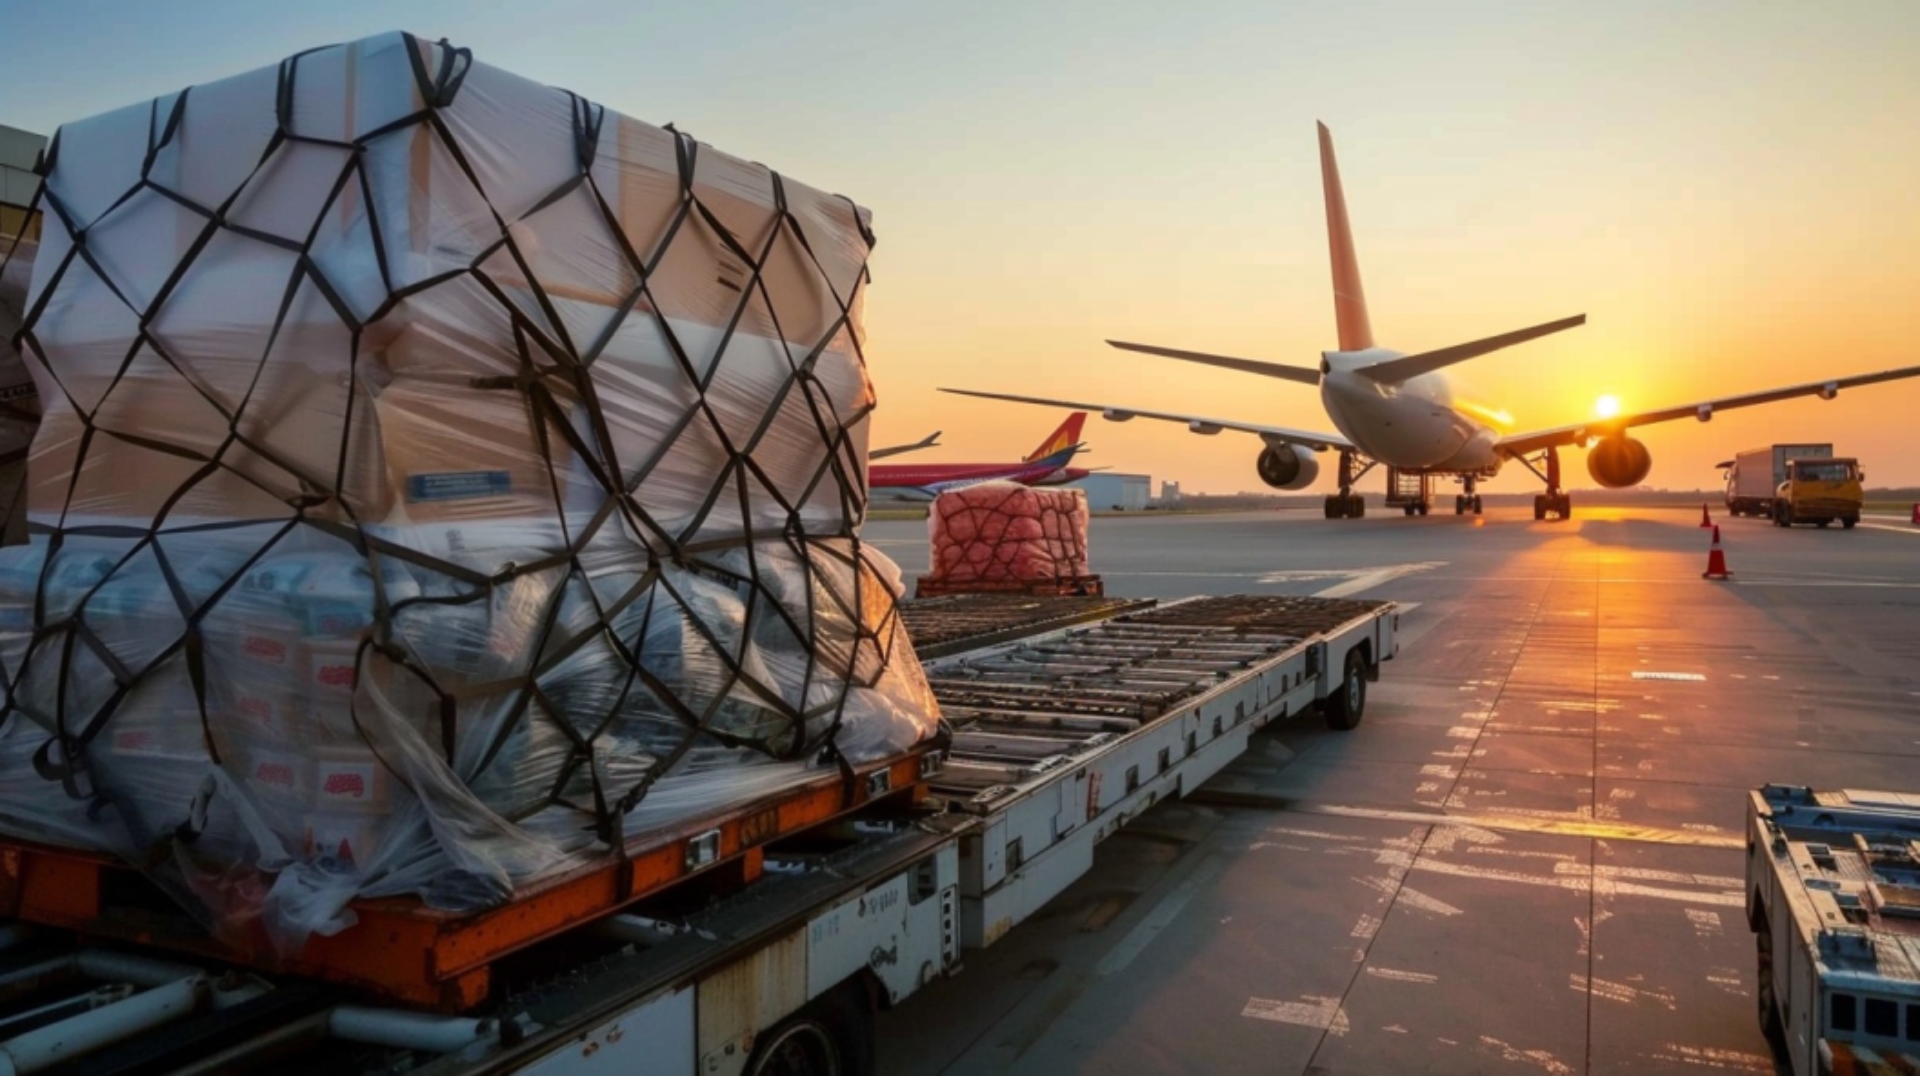 Stacks of cargo, wrapped in protective plastic and secured with netting, are loaded onto a trolley at an airport as the sun sets. An airplane, poised for the air freight industry, is parked nearby on the tarmac, ready for departure. Airport personnel and vehicles are visible in the background.